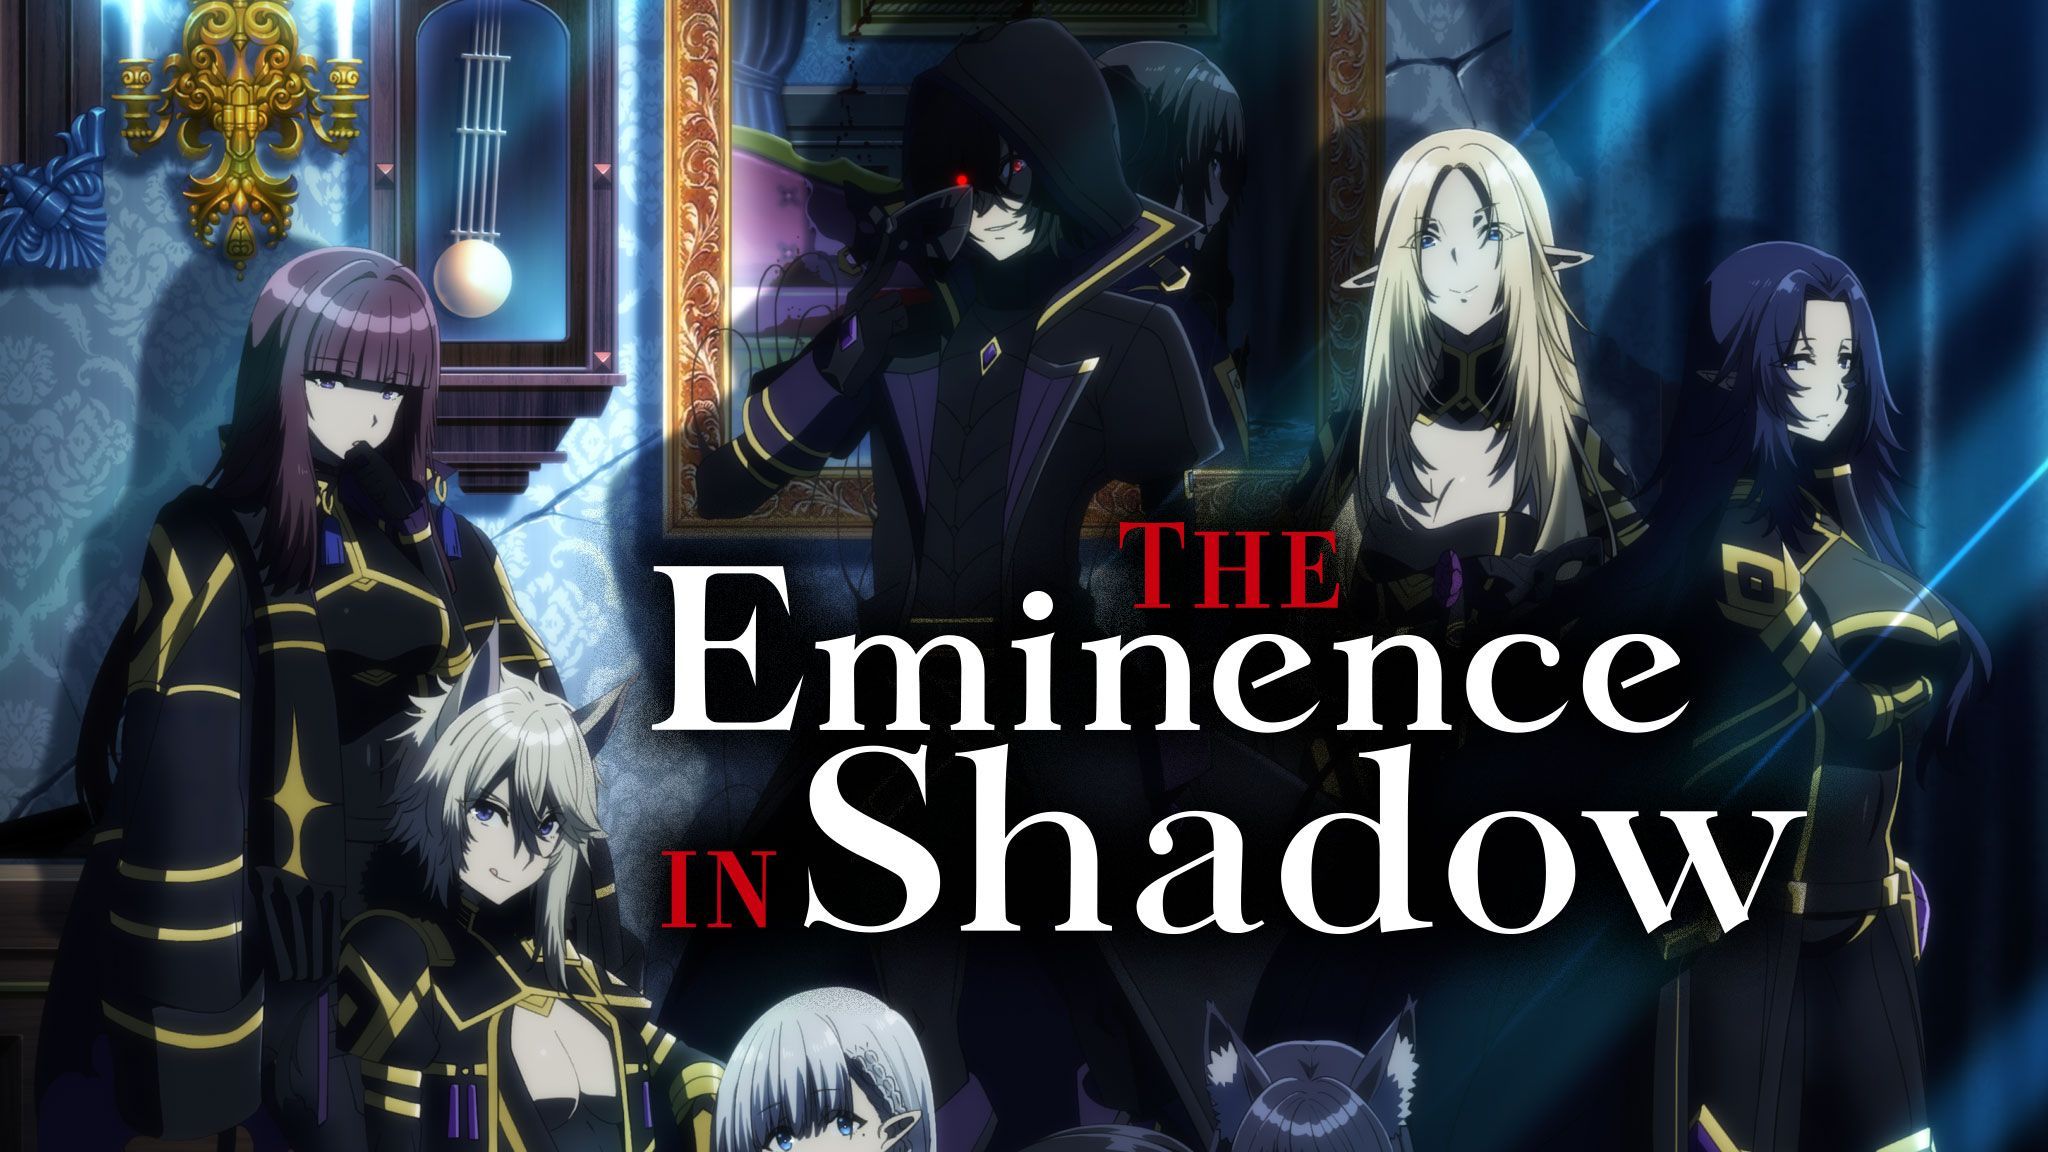 The Eminence in Shadow Season 2 Episode 2 English Dub spoilers